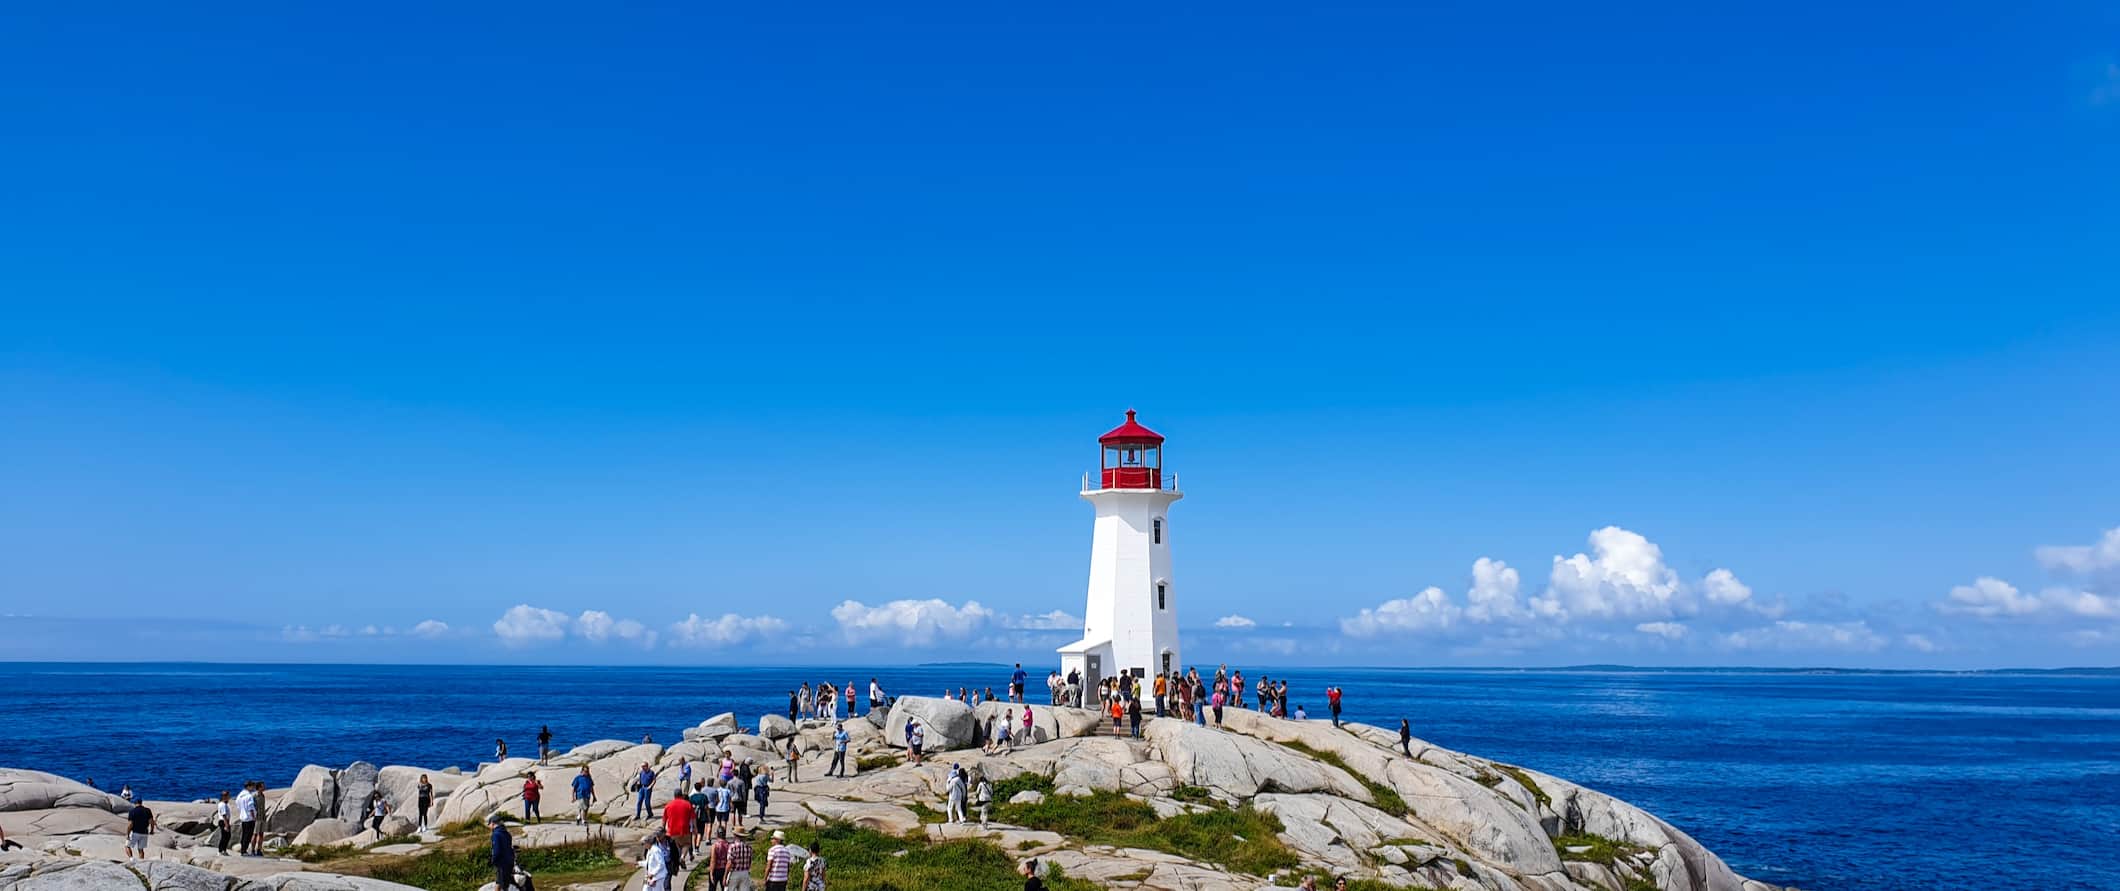 The iconic white lighthouse in Peggy's Cove, Nova Scotia on a sunny summer day